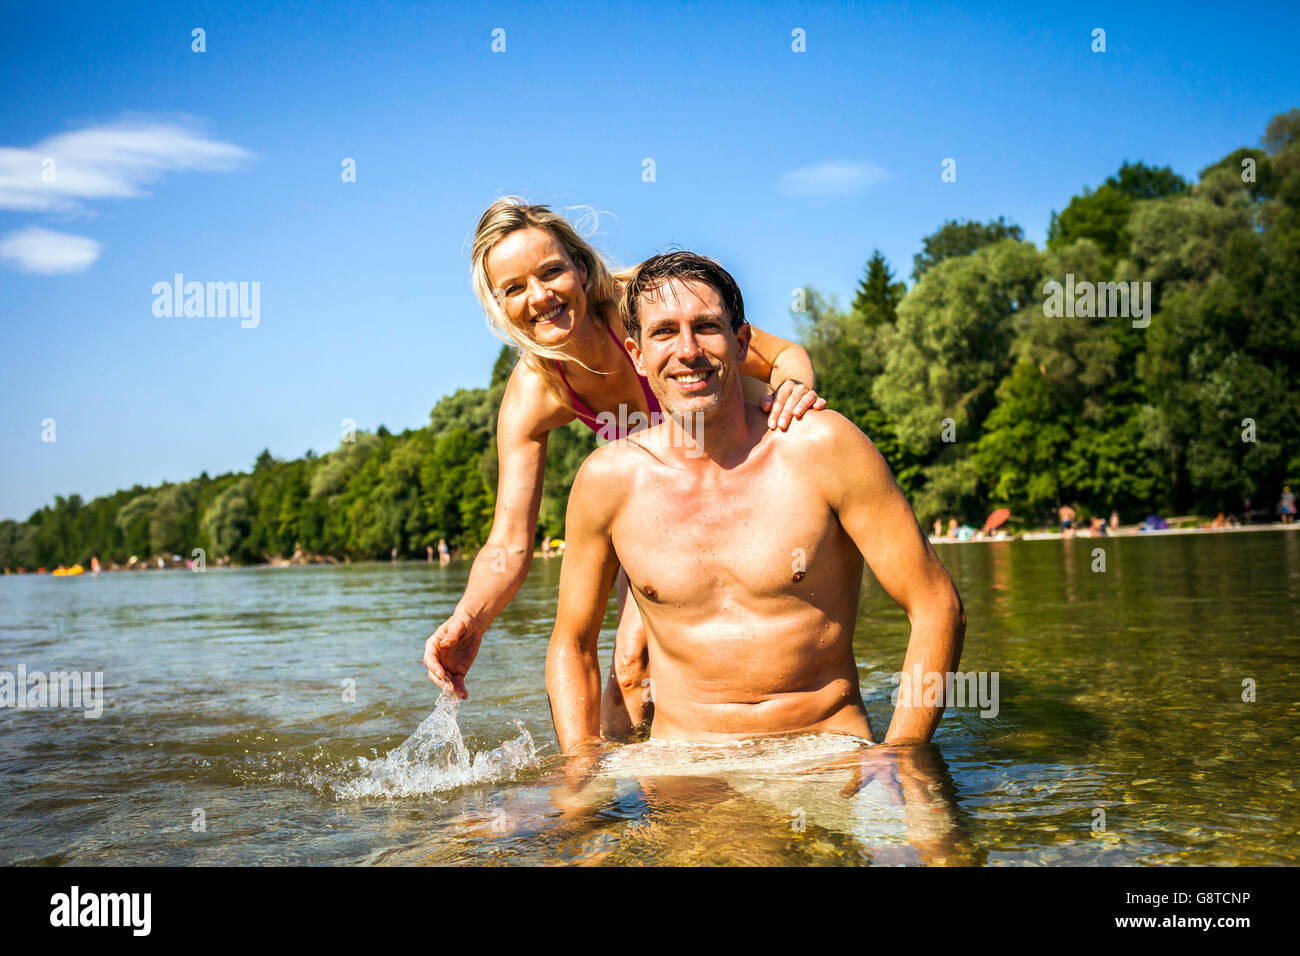 Happy couple embracing in the river, foothills of the Alps, Bavaria, Germany Stock Photo